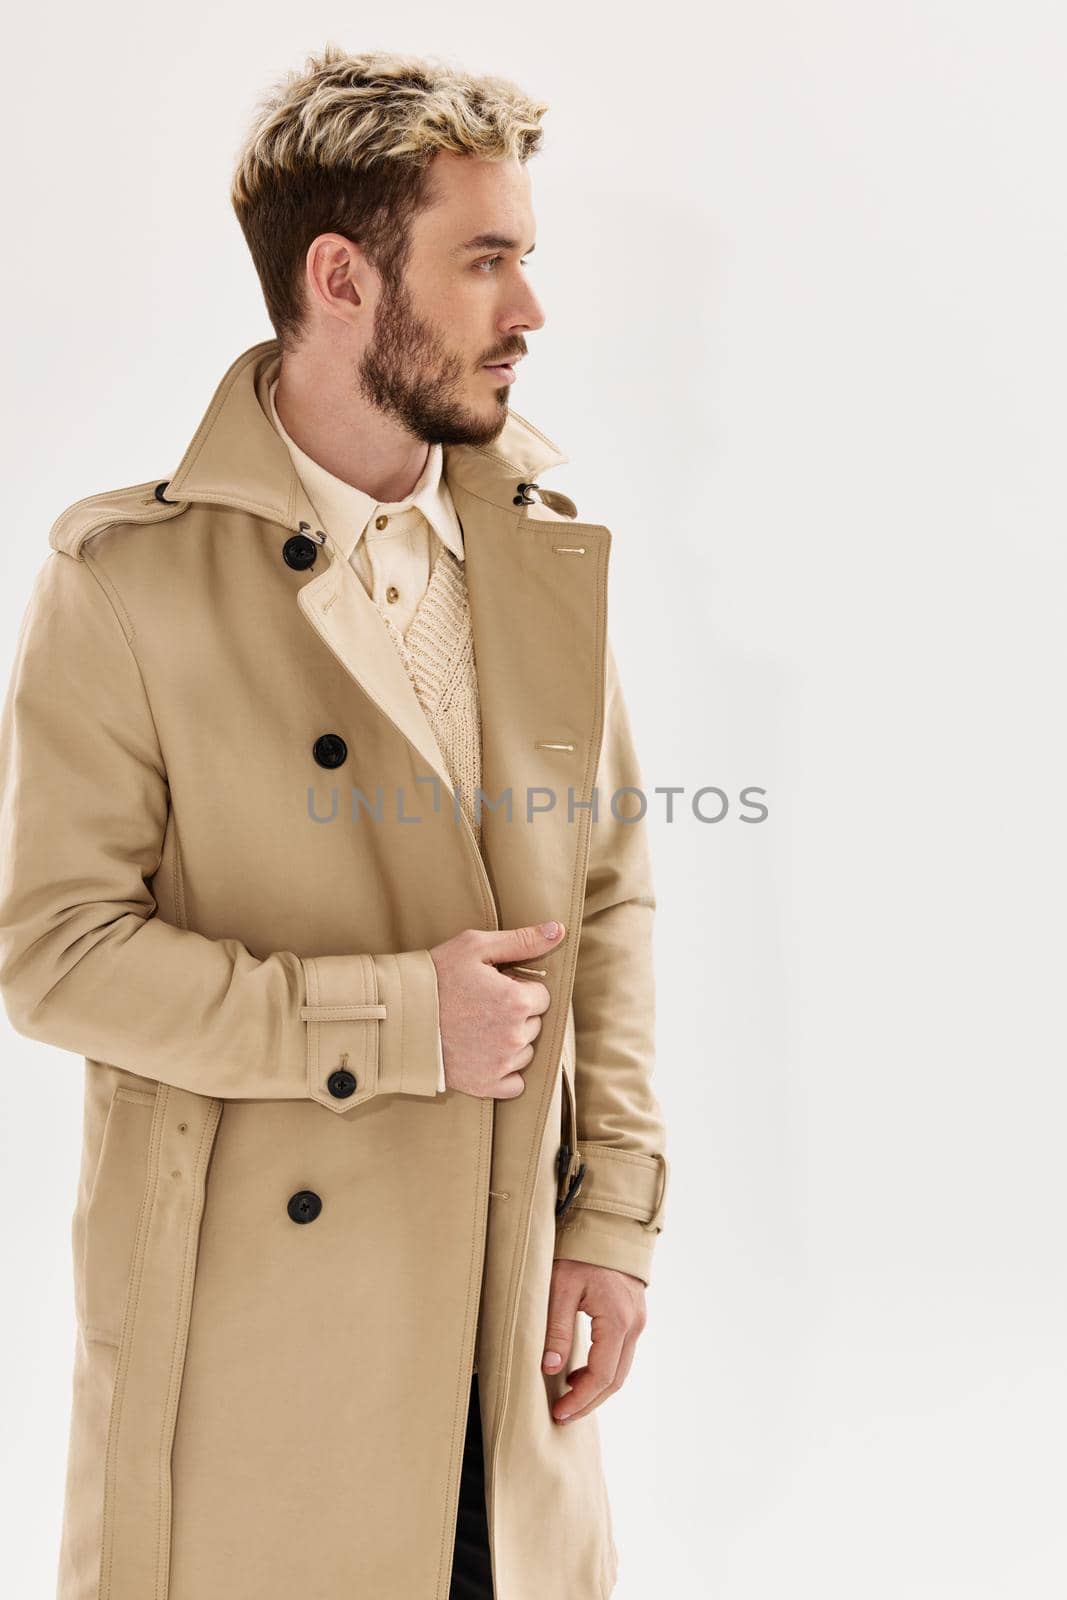 man with trendy hairstyle in beige coat modern style autumn clothing by SHOTPRIME